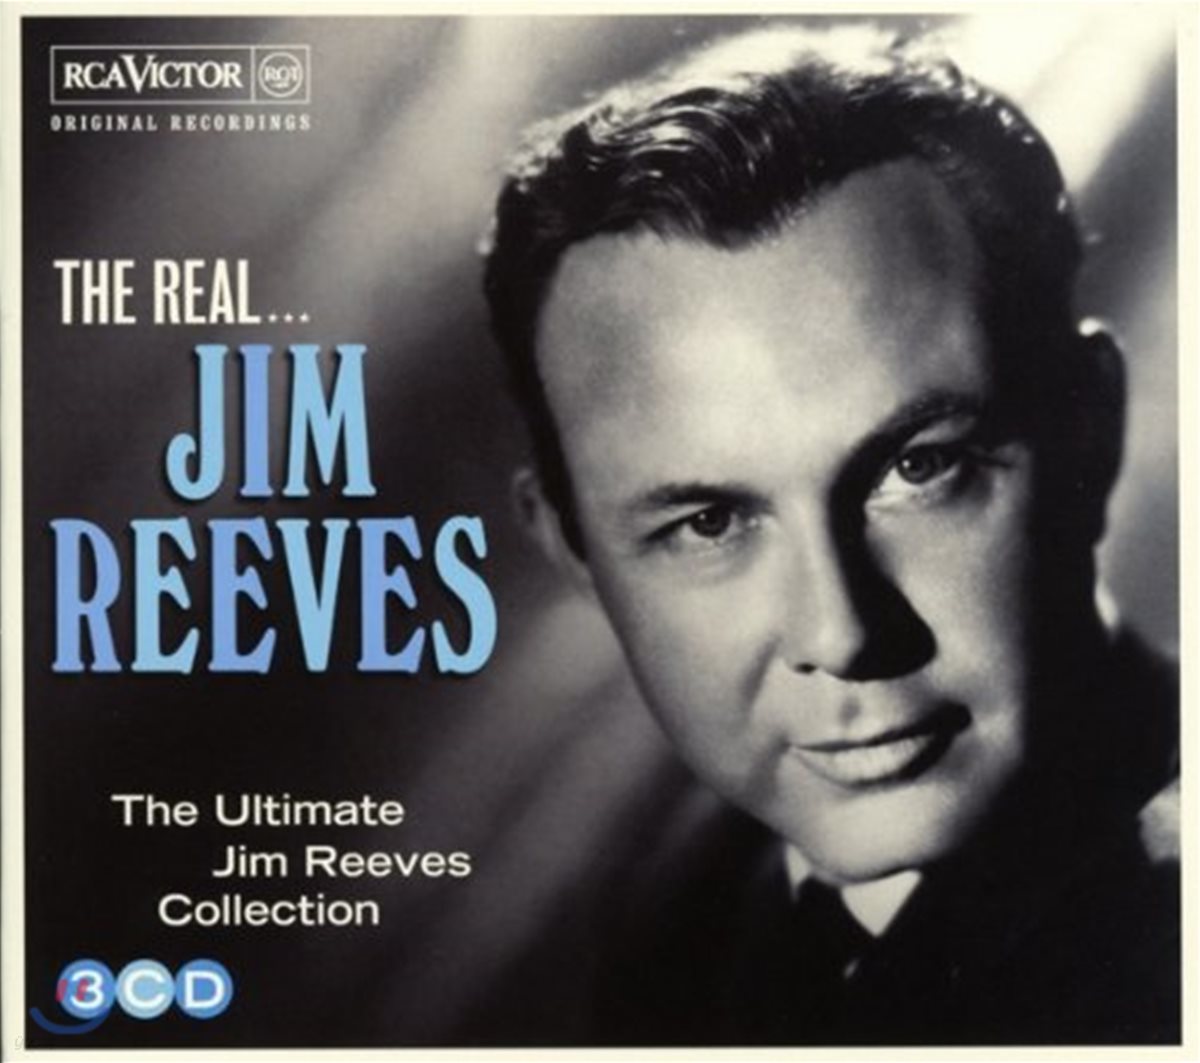 Jim Reeves - The Ultimate Jim Reeves Collection: The Real... Jim Reeves